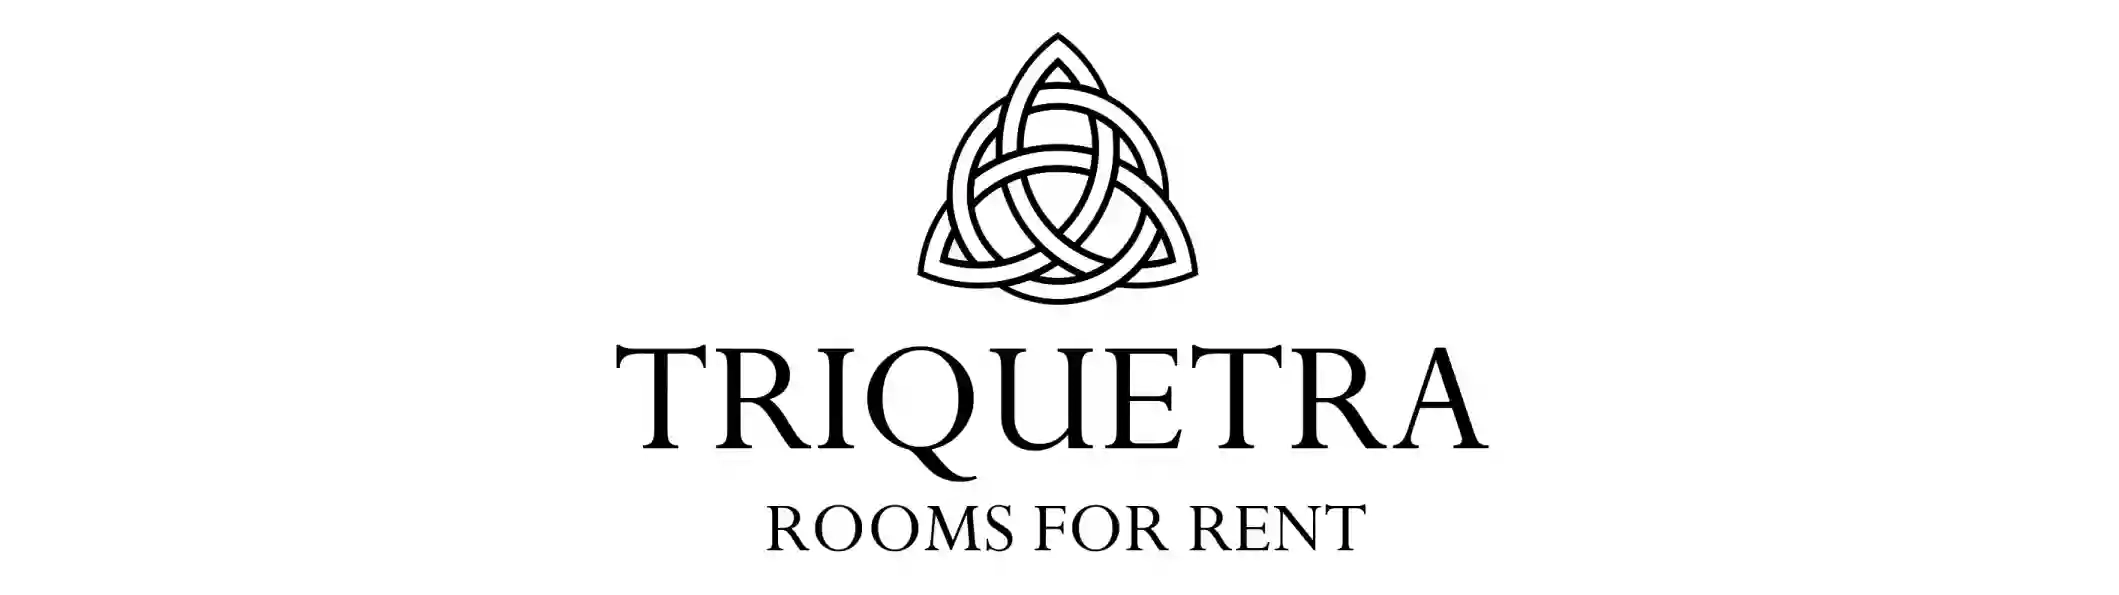 Triquetra - Rooms for Rent